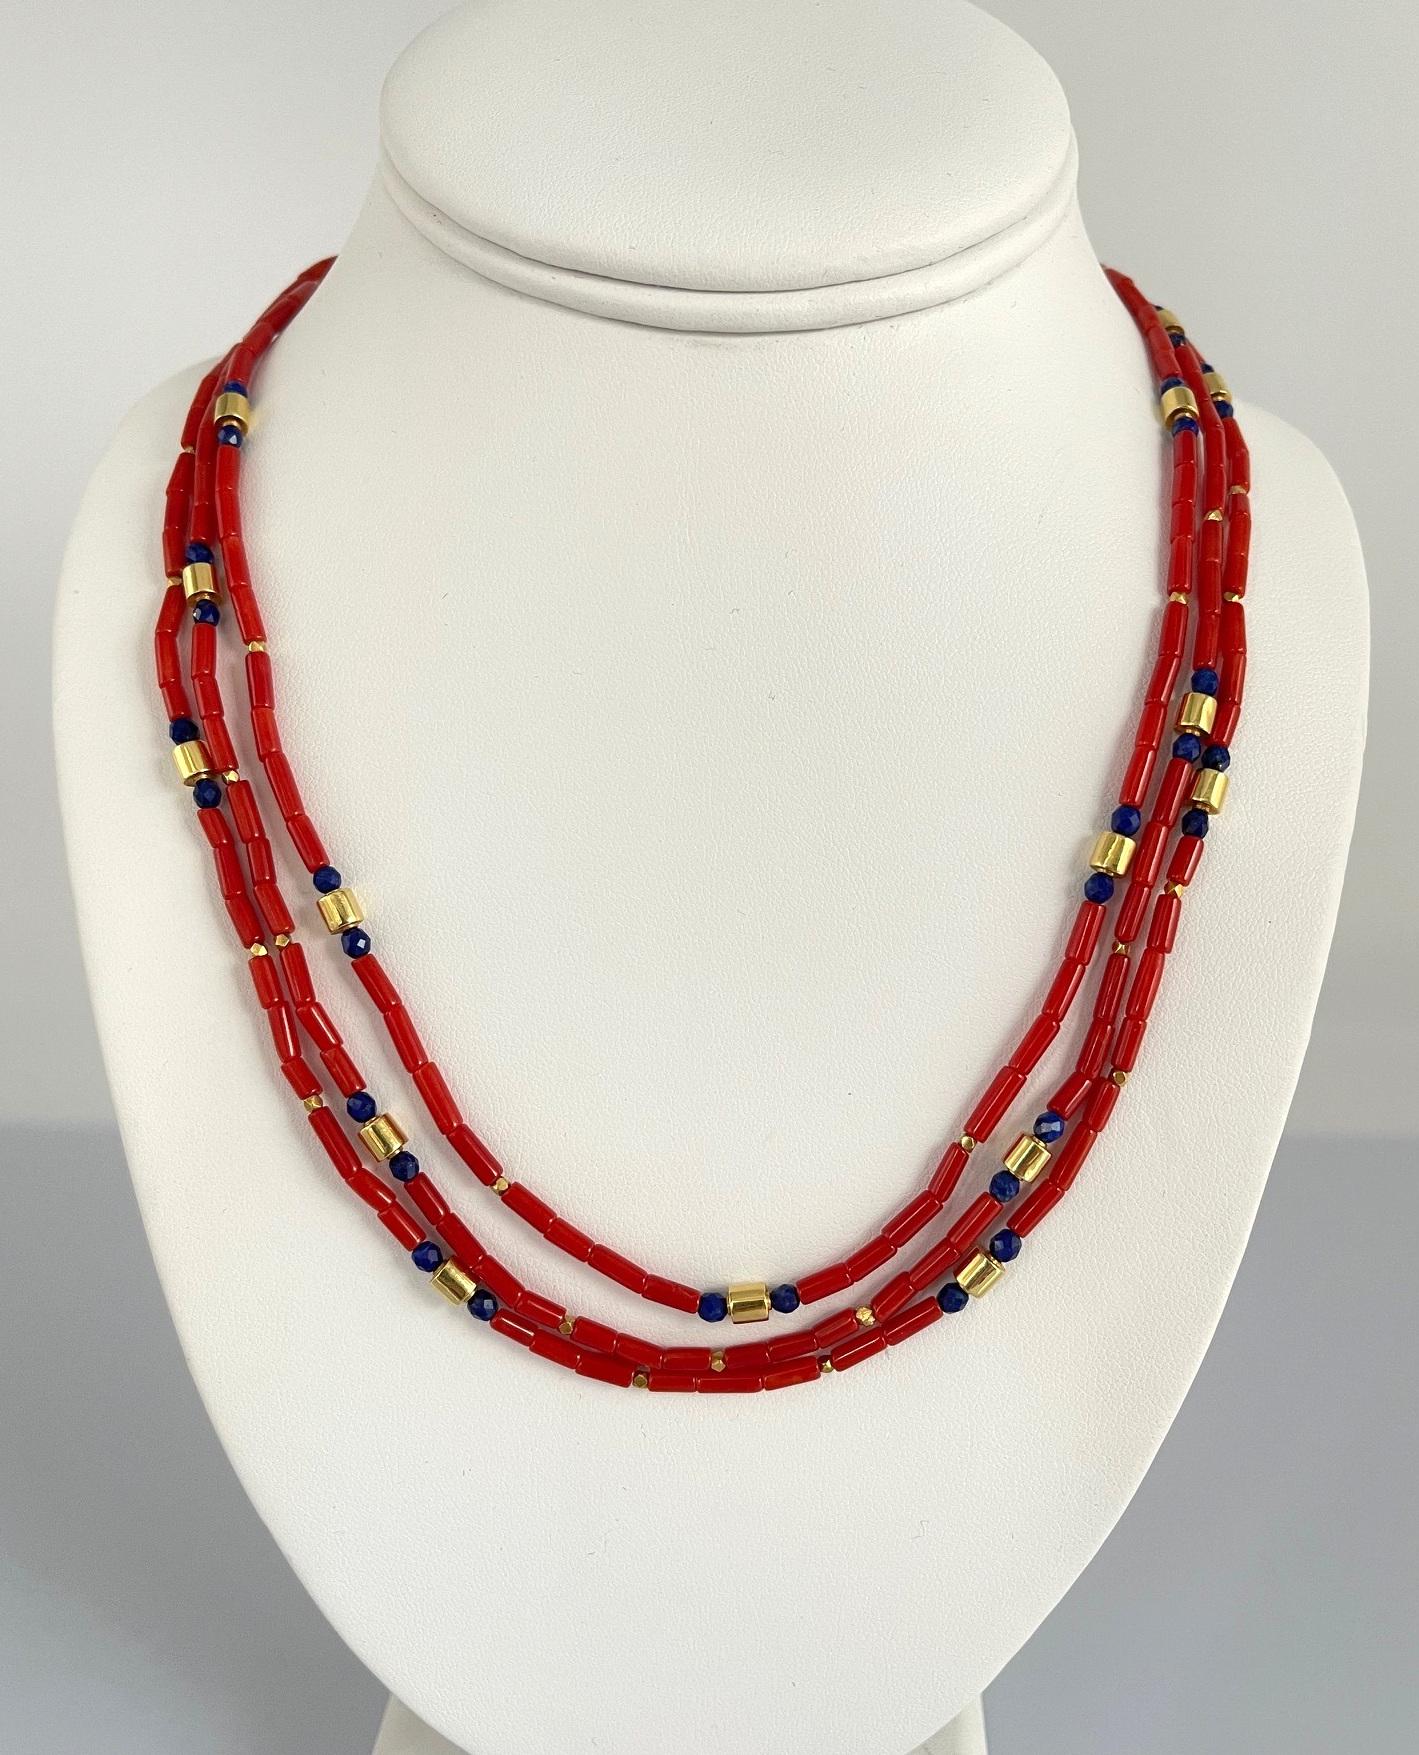 Mediterranean Red Coral and Lapis Beaded Necklace with 18k Yellow Gold Accents For Sale 4